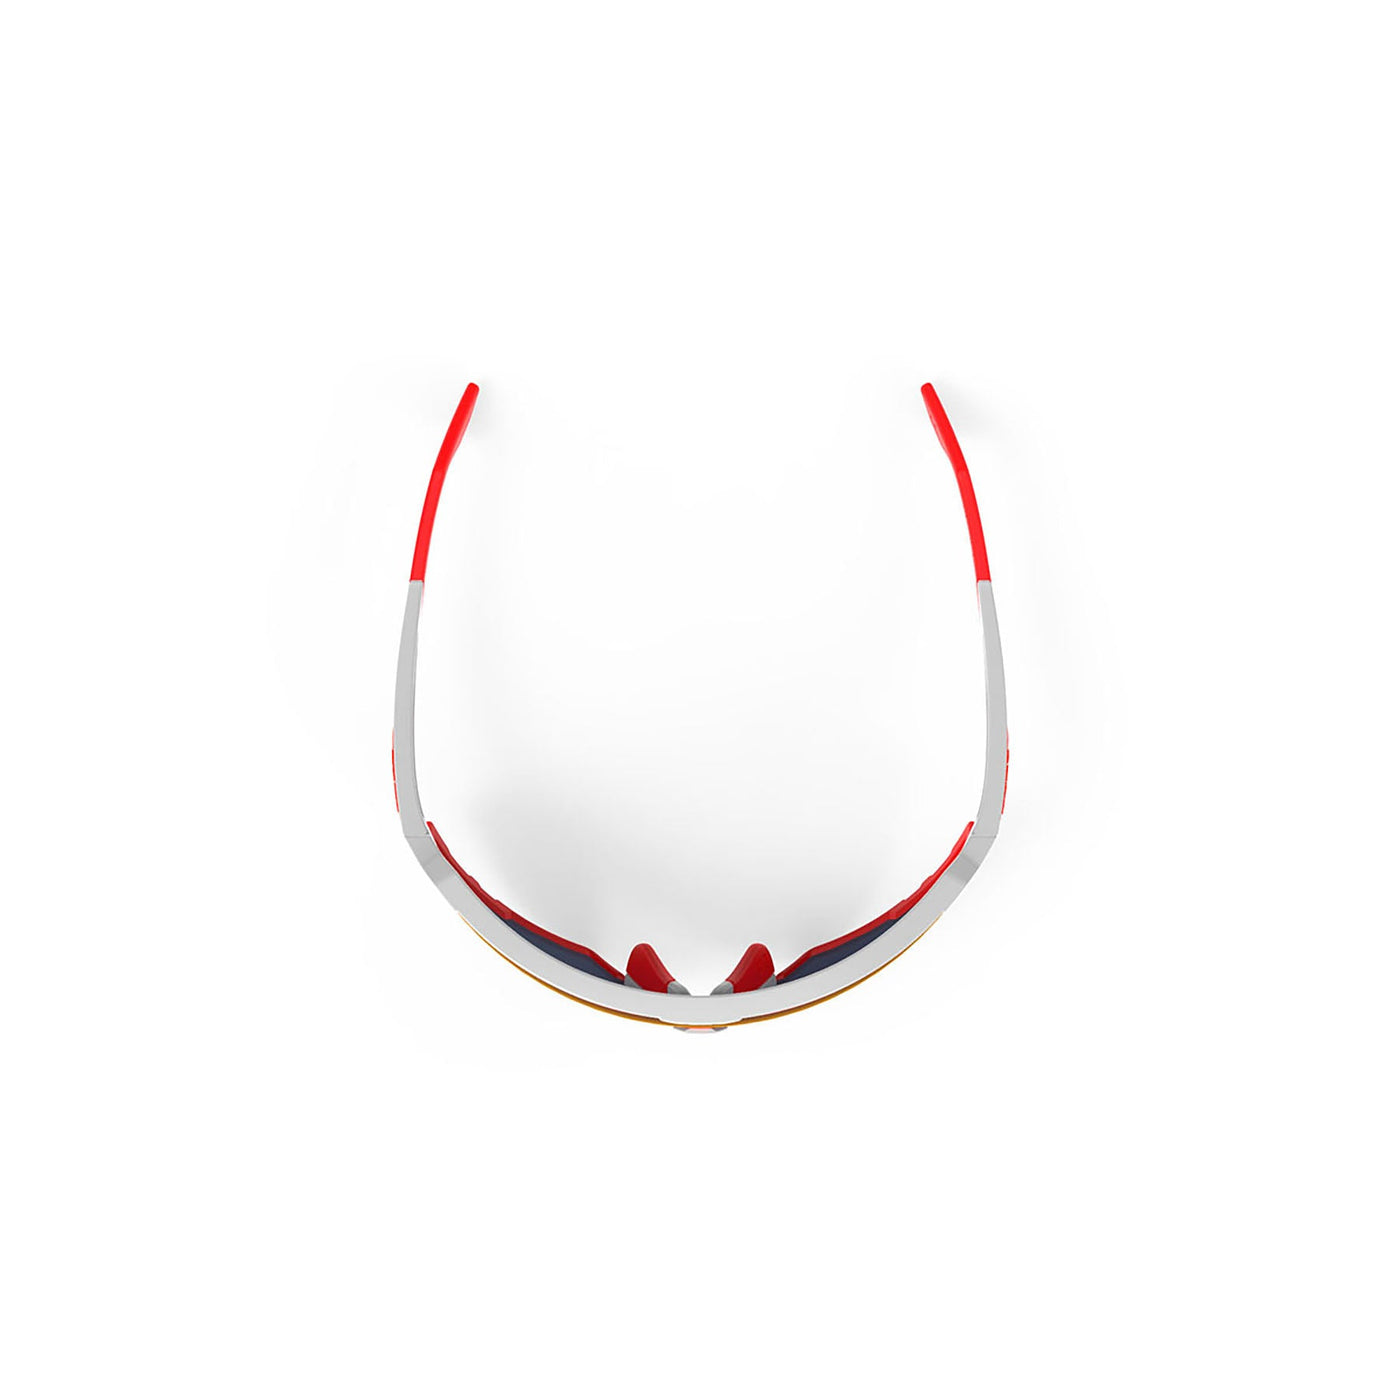 Rudy Project running and cycling sport sunglasses#color_defender-white-gloss-frame-and-multilaser-red-lenses-red-bumpers